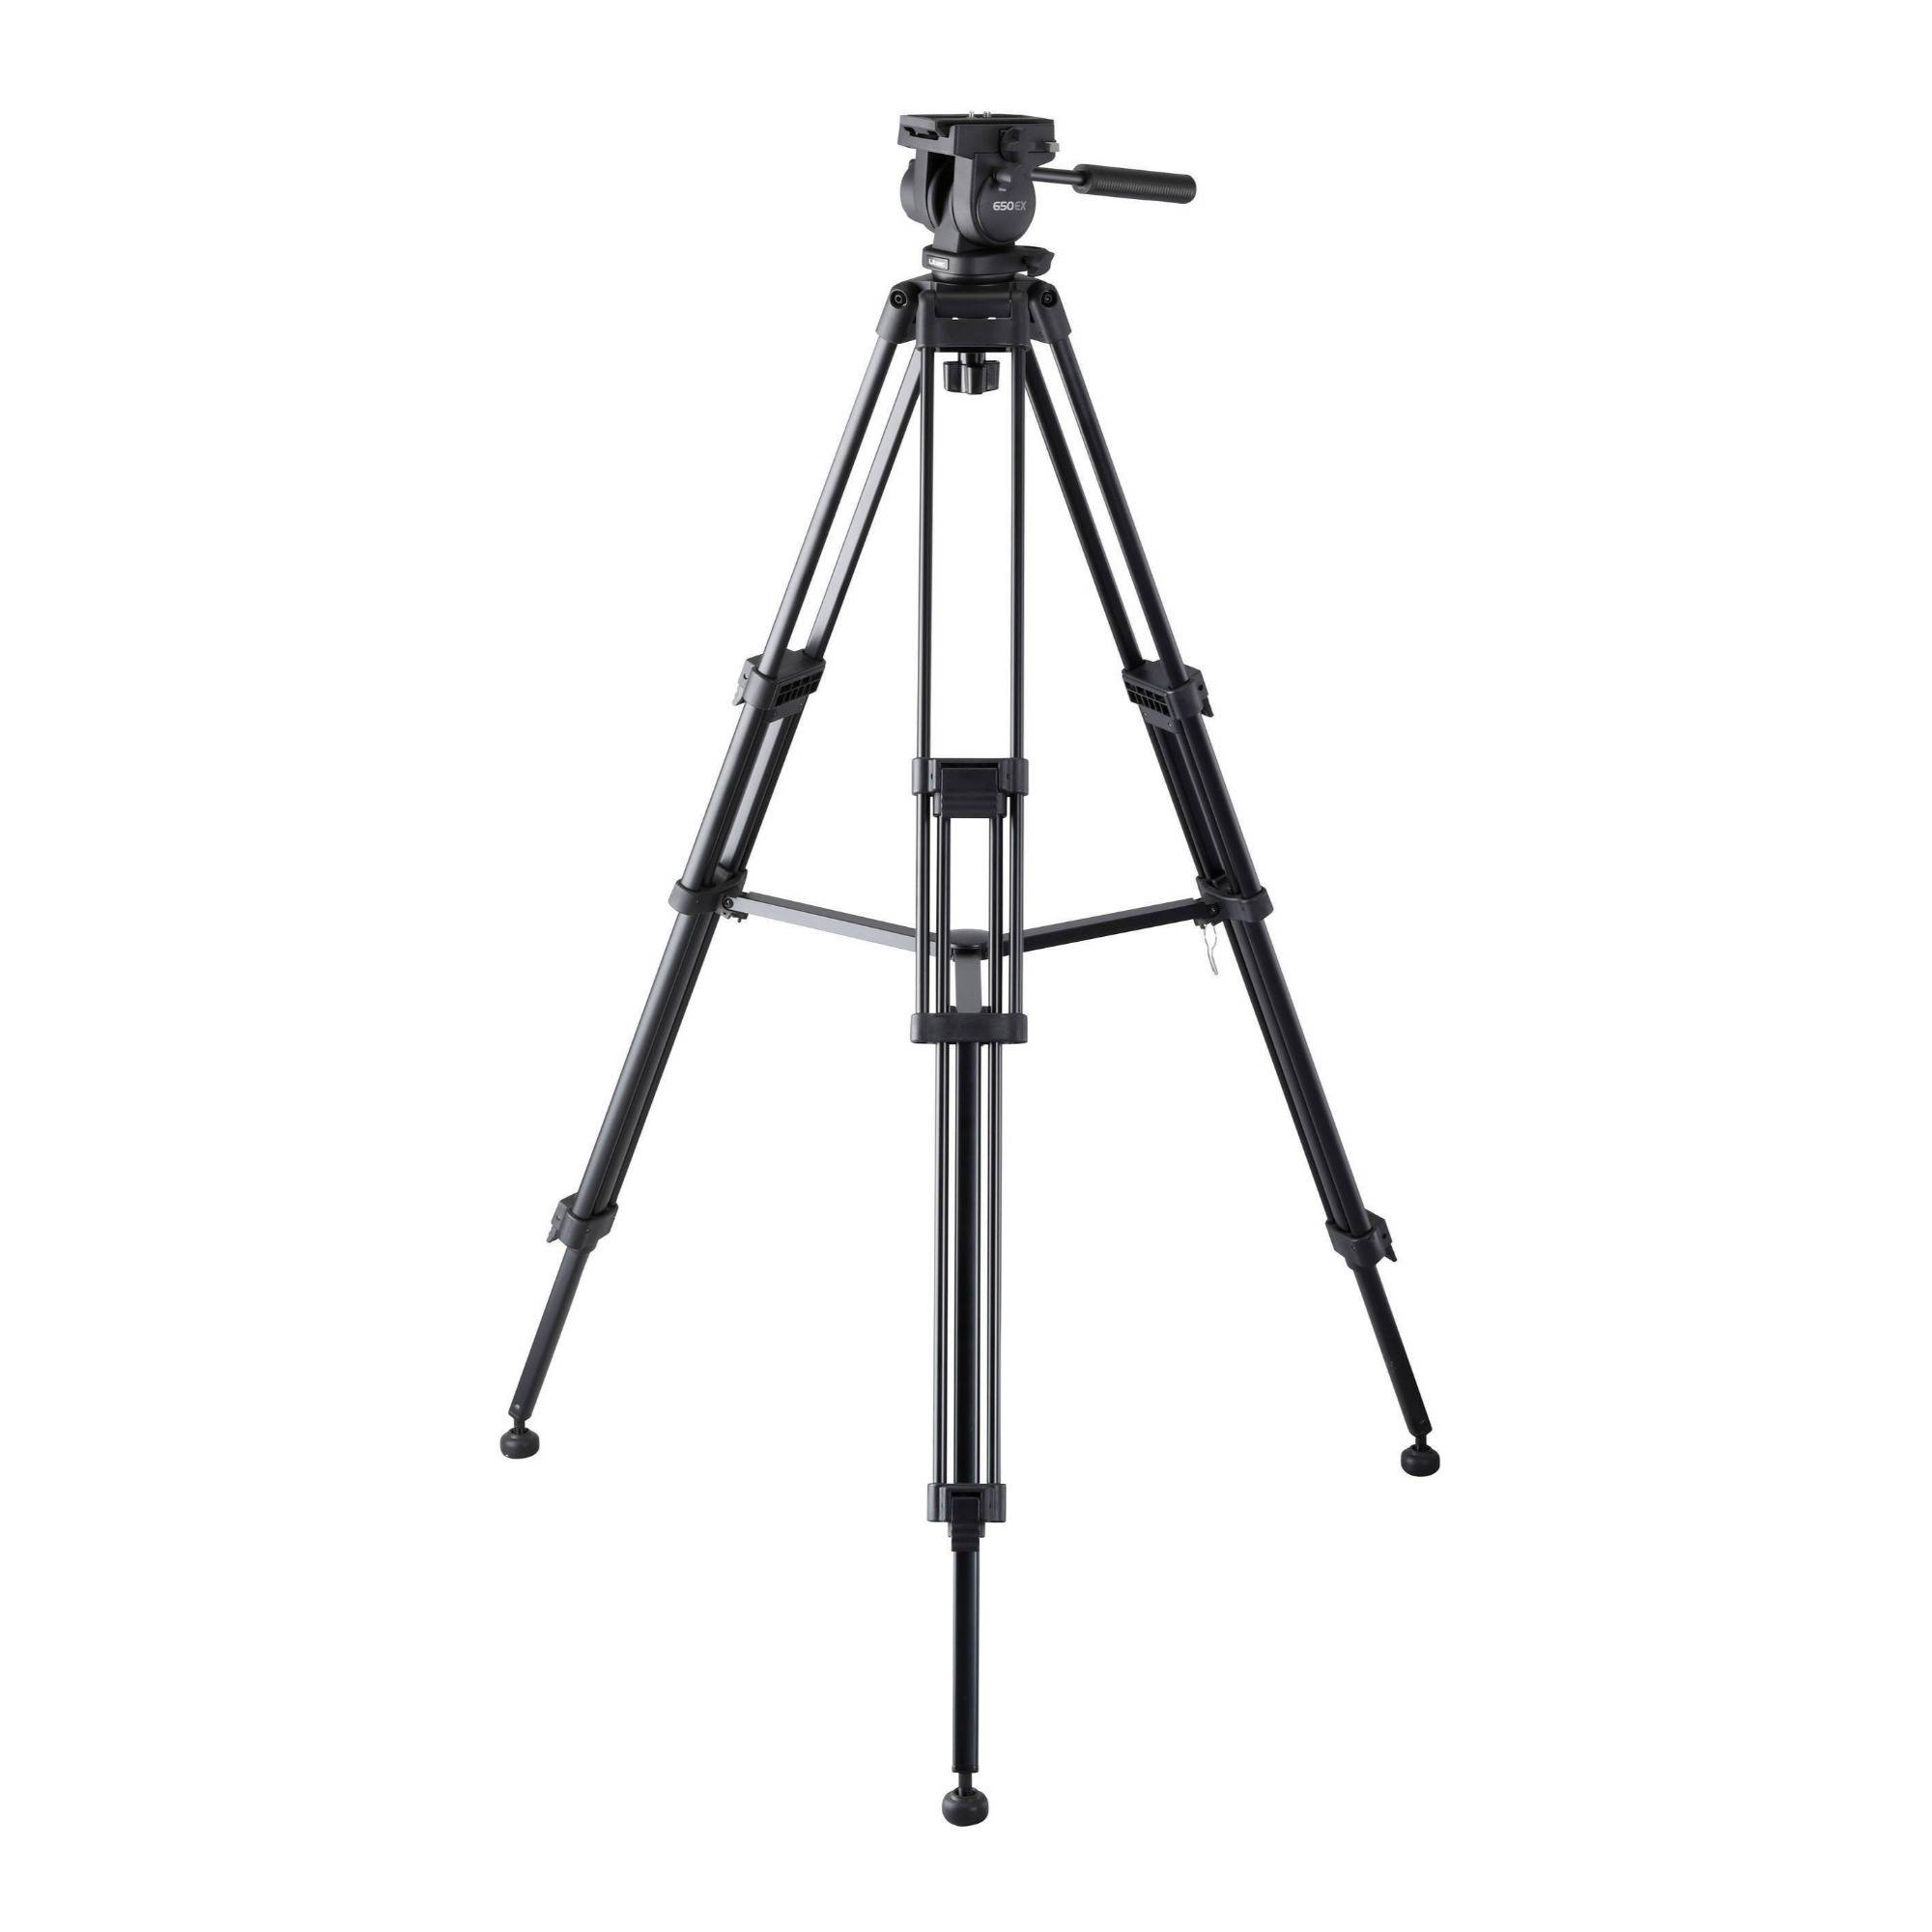 Libec 650EX 6.6Lb Capacity, 65mm Ball, One-Touch Flip Locks, Video Tripod with Pan Handle System